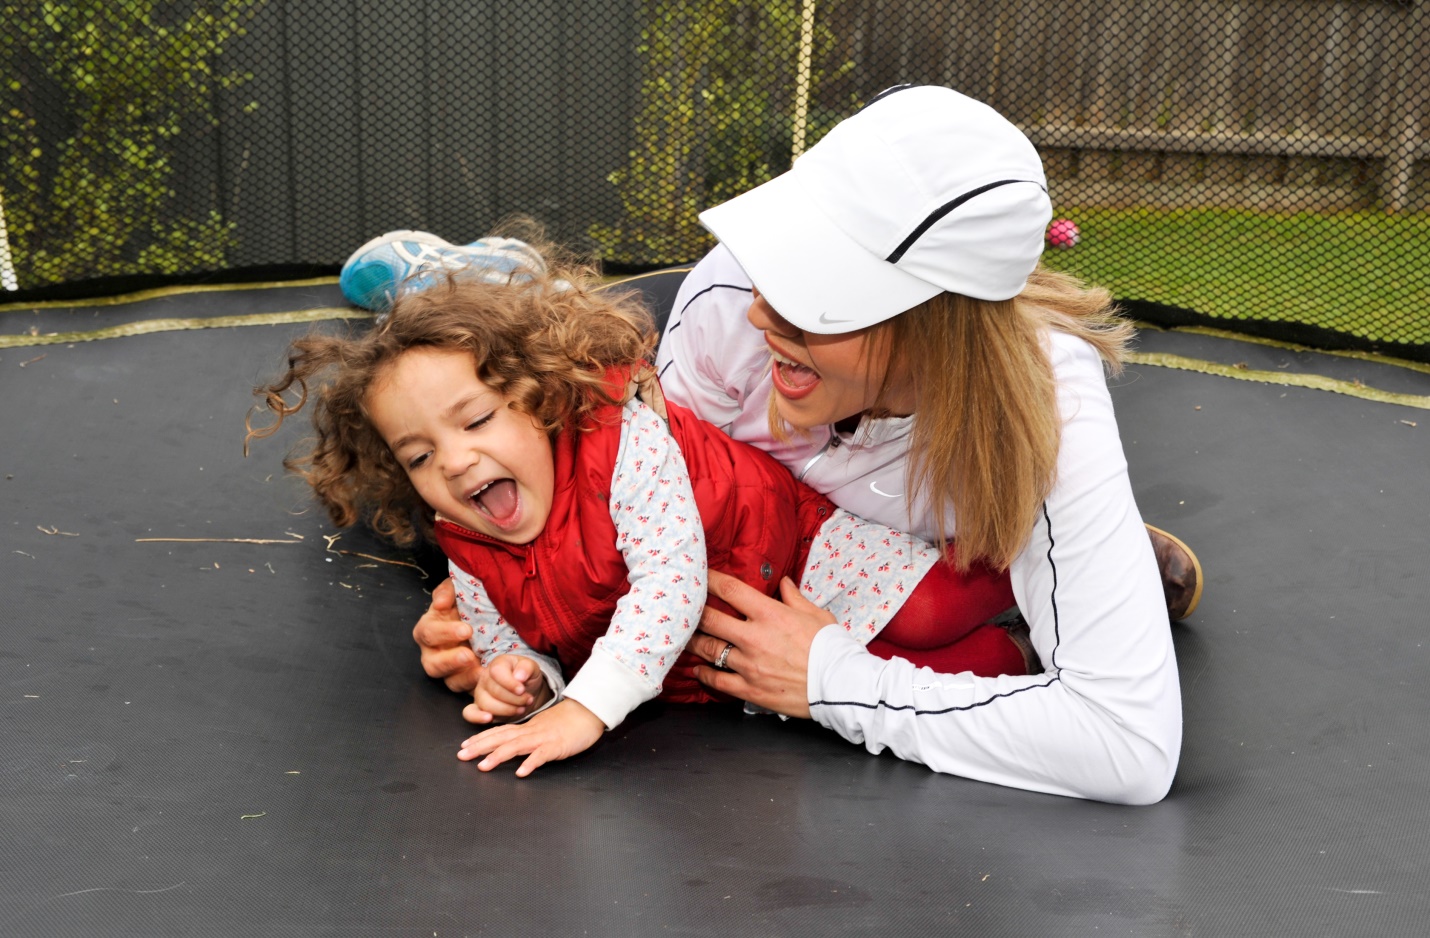 Adult and child on trampoline